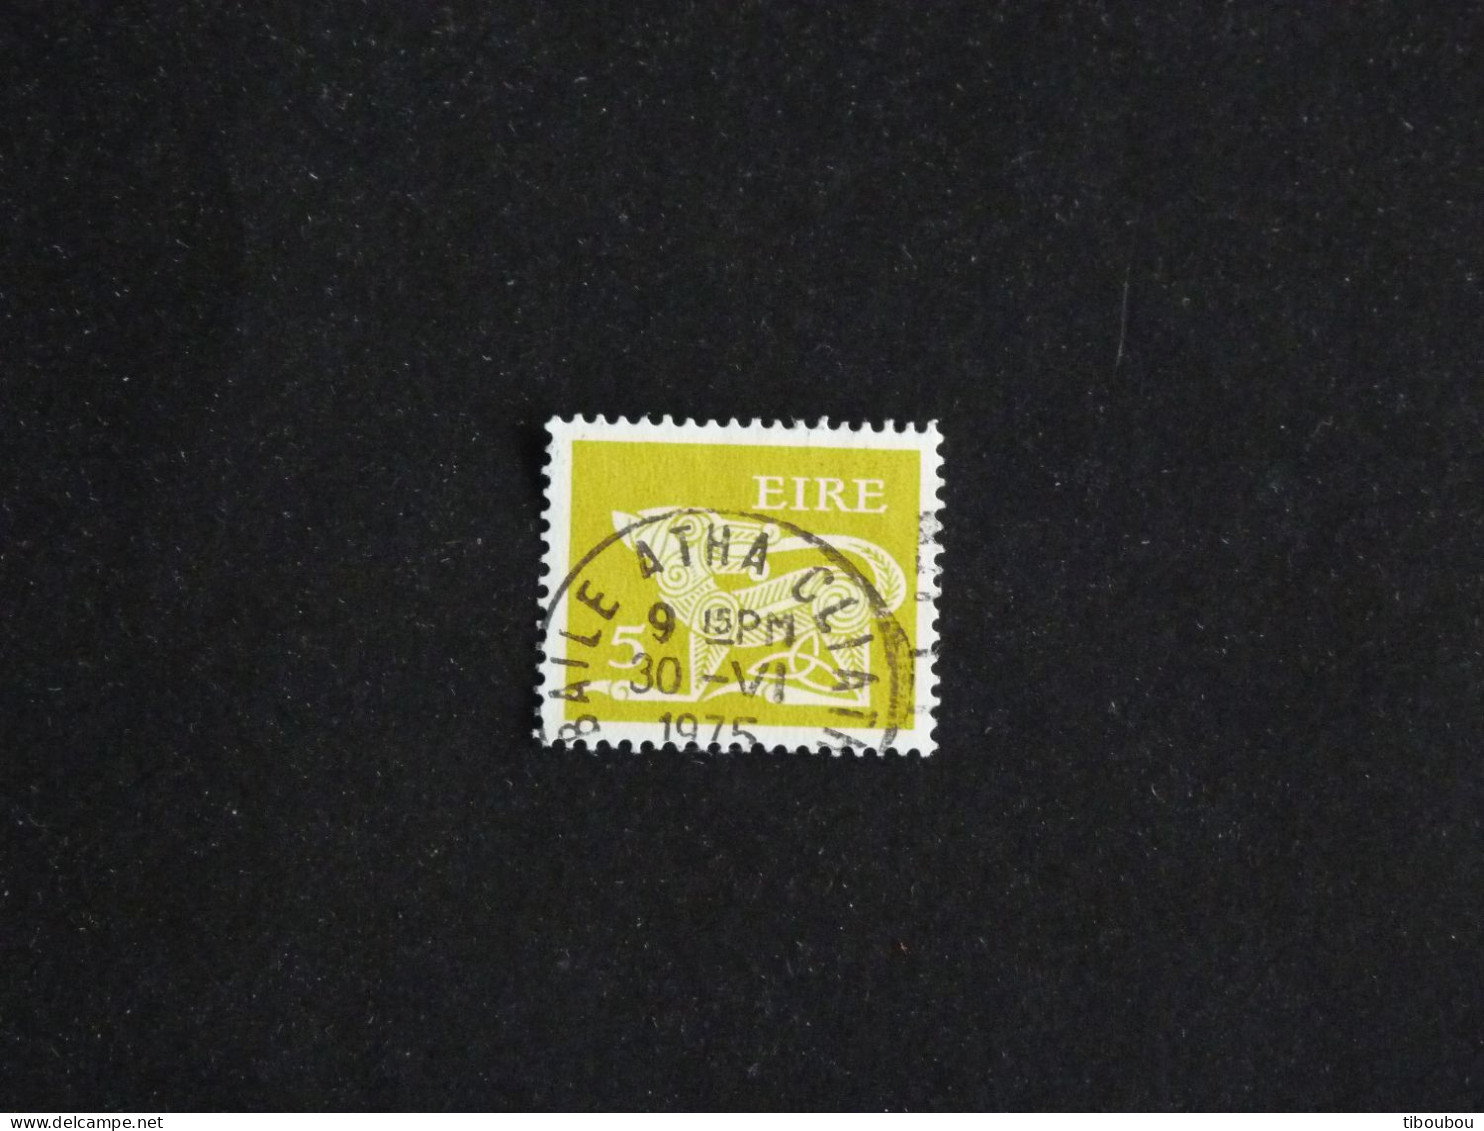 IRLANDE IRELAND EIRE YT 318E OBLITERE - CHIEN STYLISE BROCHE ANCIENNE - Used Stamps